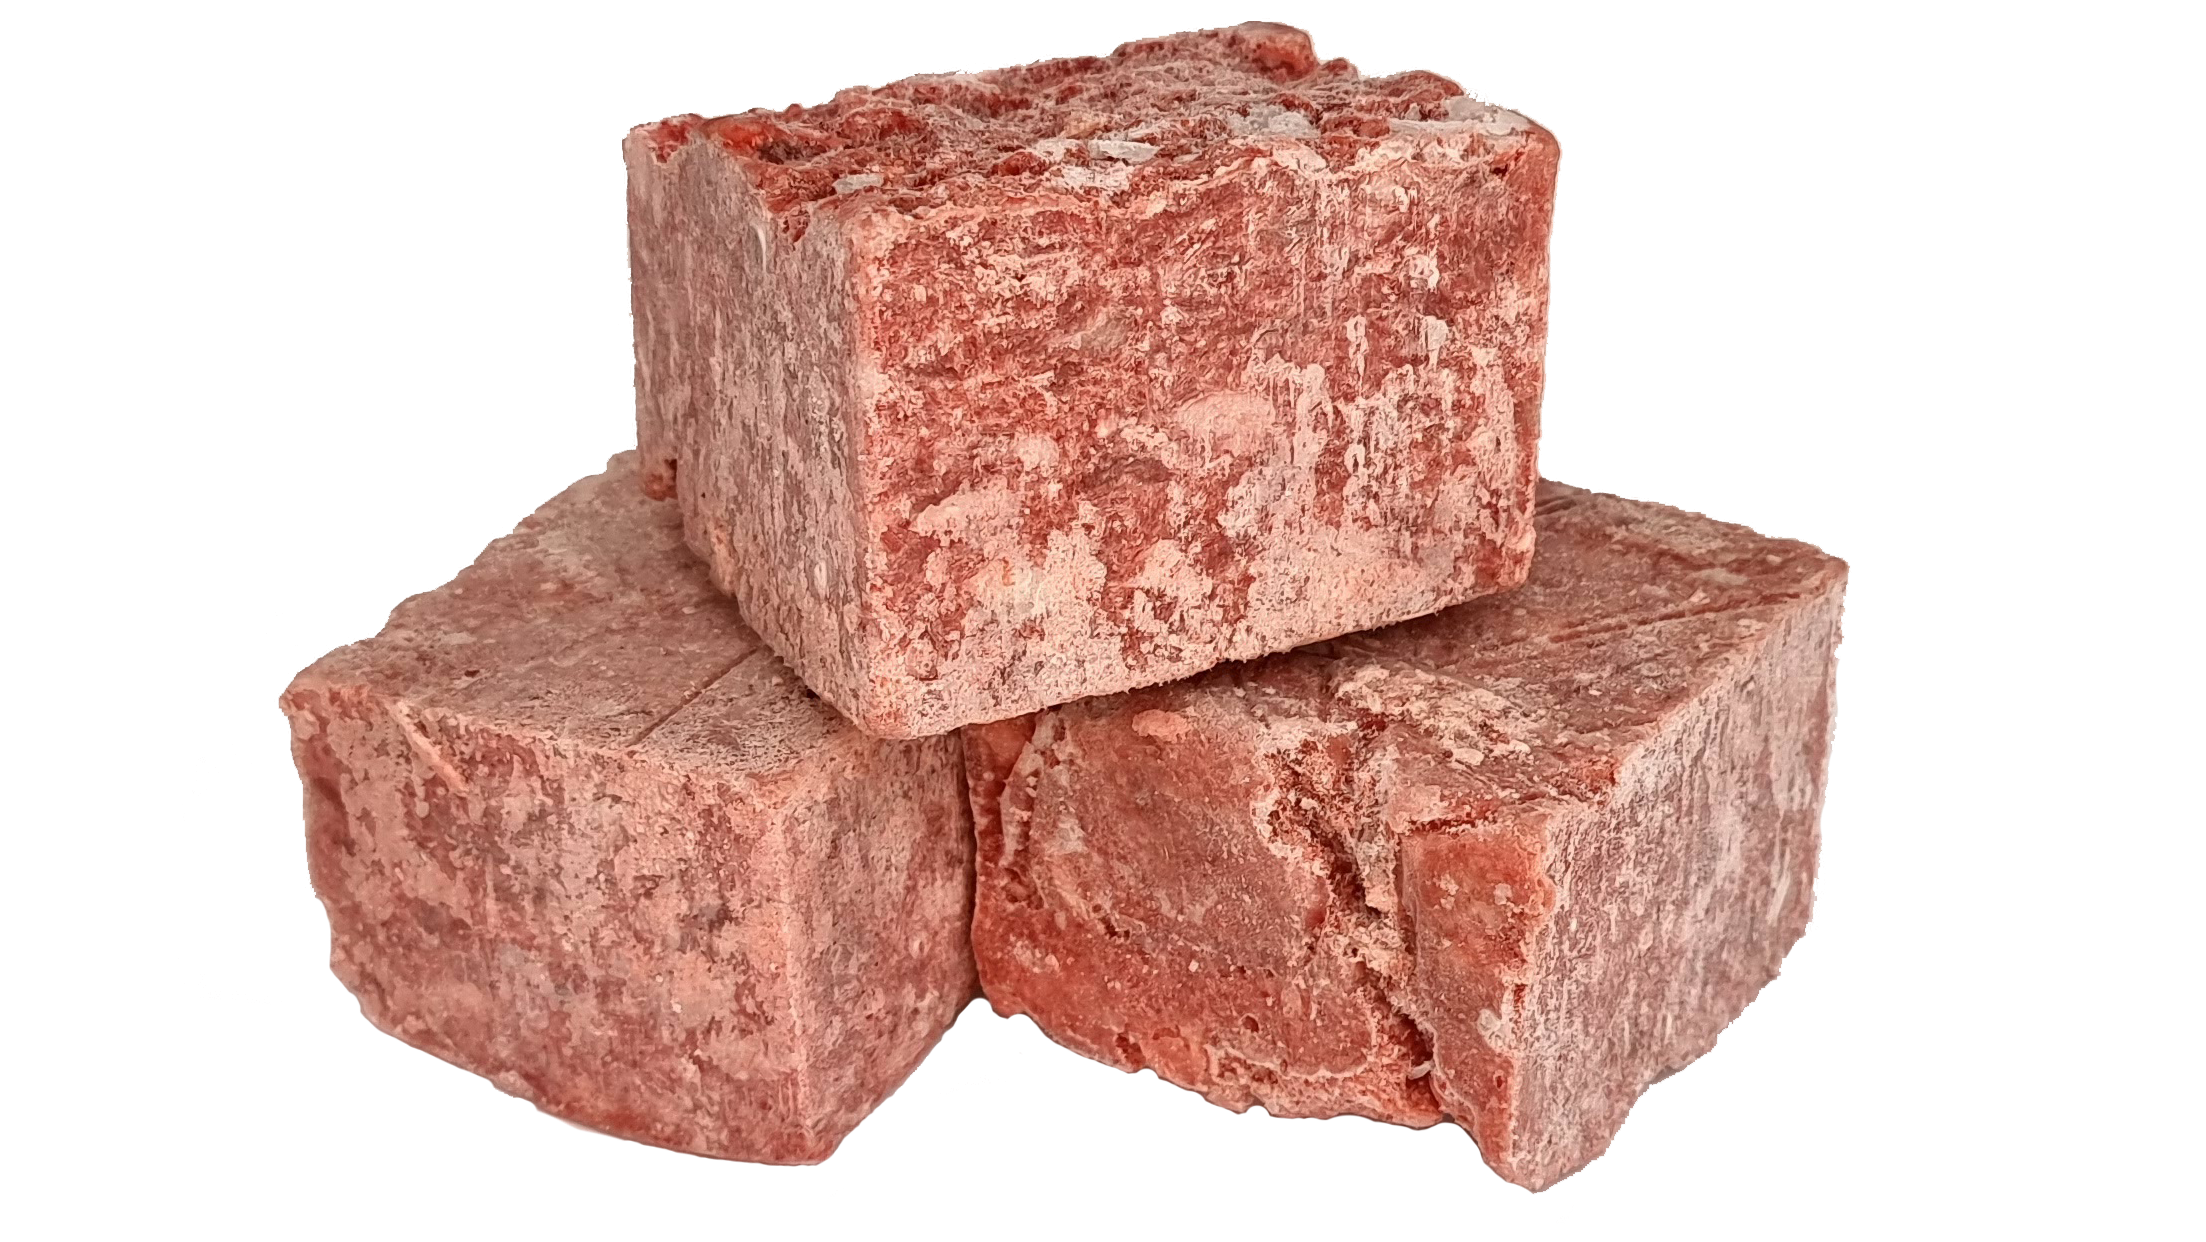 Click & Collect from BENFLEET - Chicken, Bone and Offal COMPLETE  - 10 x 1kg unwrapped blocks of Raw Frozen Mince